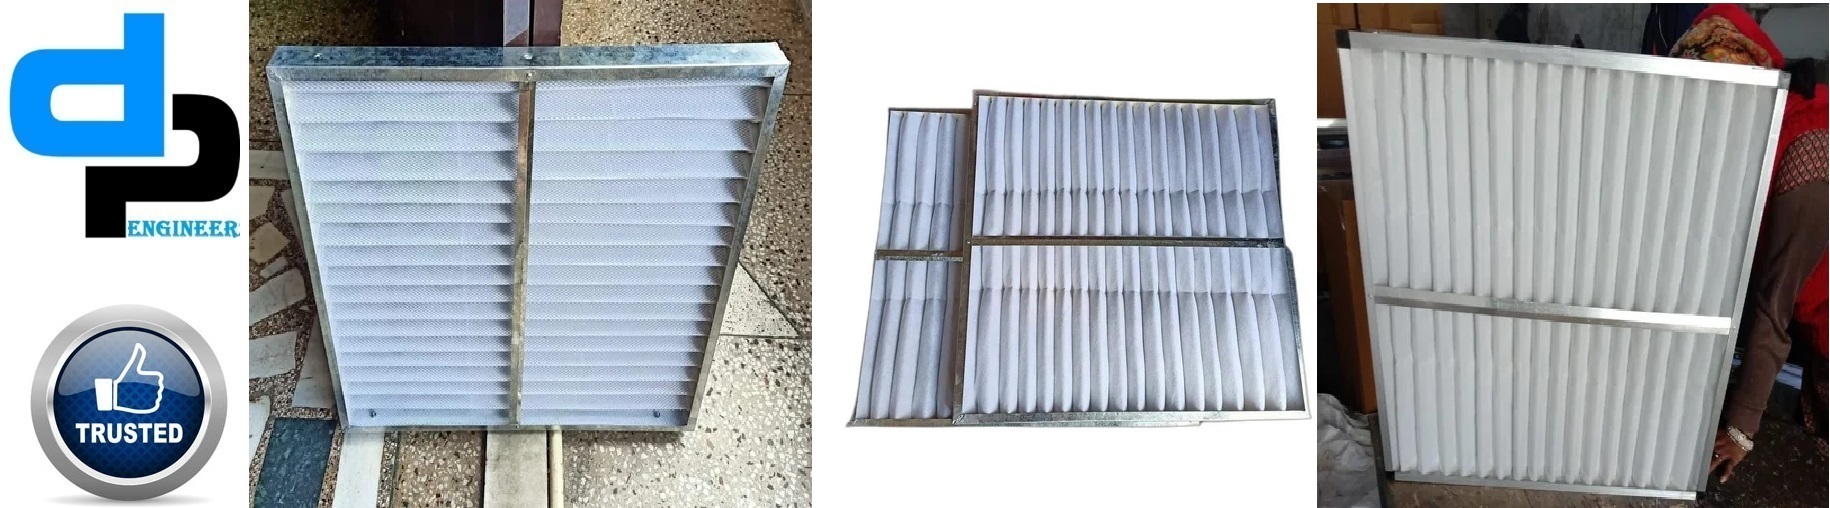 Ductable Units PRE Filters in Adilabad Telangana